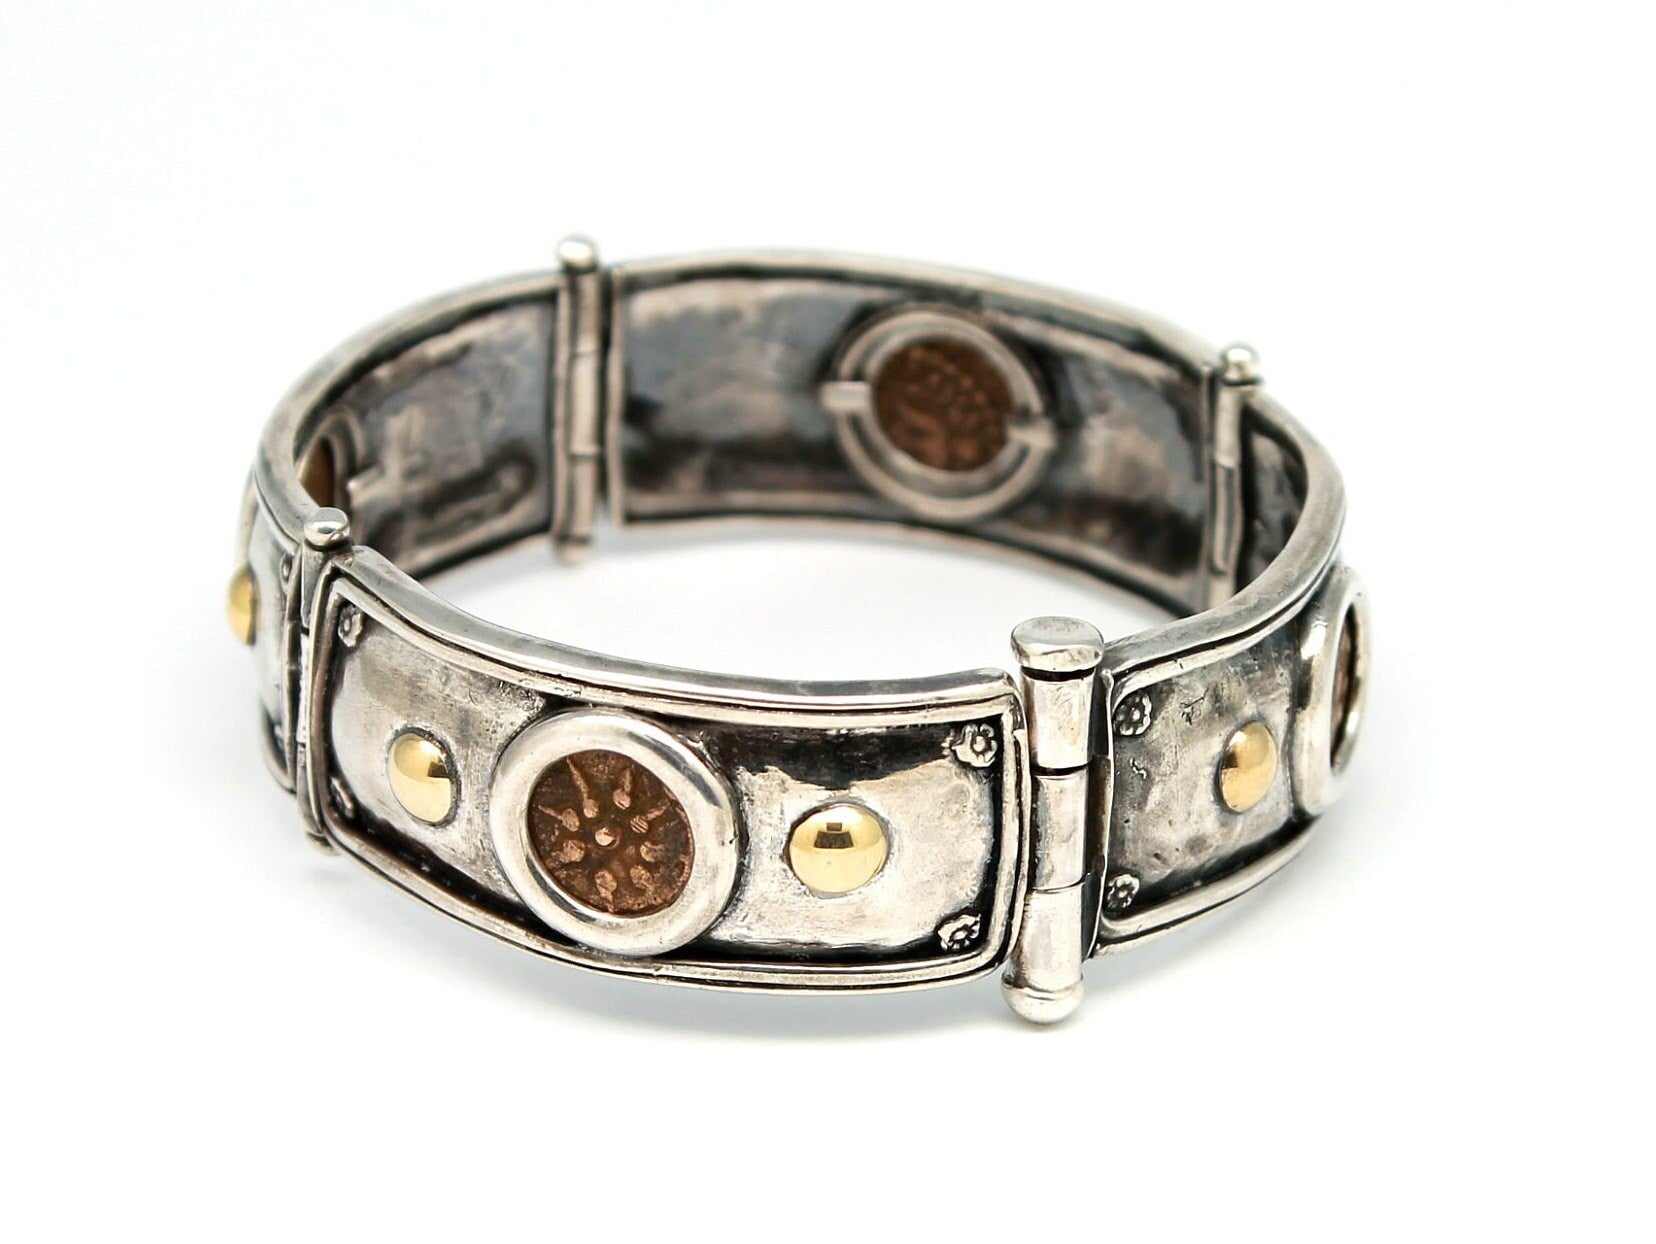 18K Gold Accents, Sterling Silver Flat Bracelet, Widows Mite, Ancient Prutah Coins, 7276